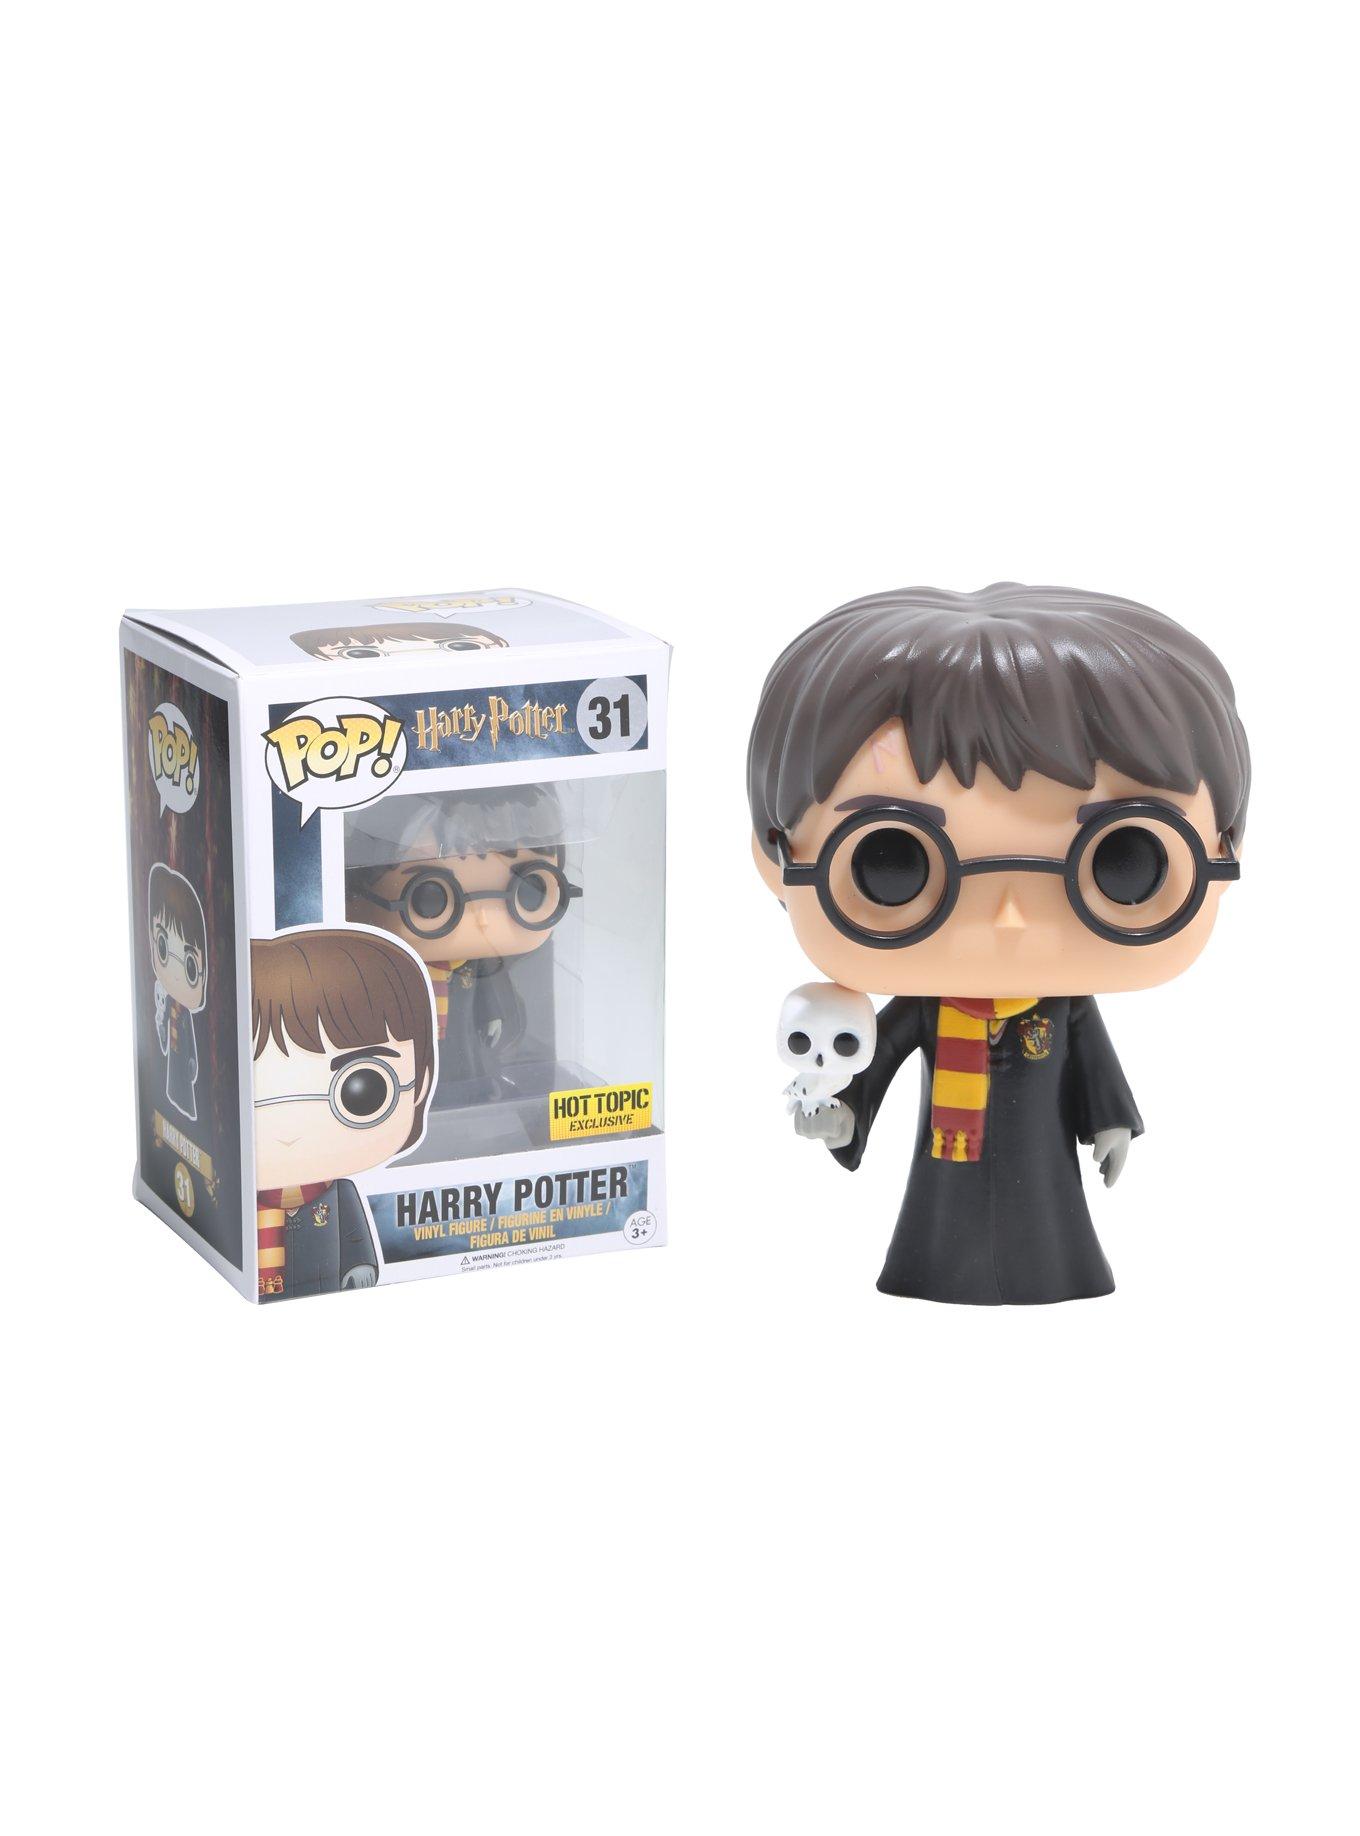 POP Deluxe Harry Potter Pushing Luggage Trolley with Hedwig Vinyl Figure Funko